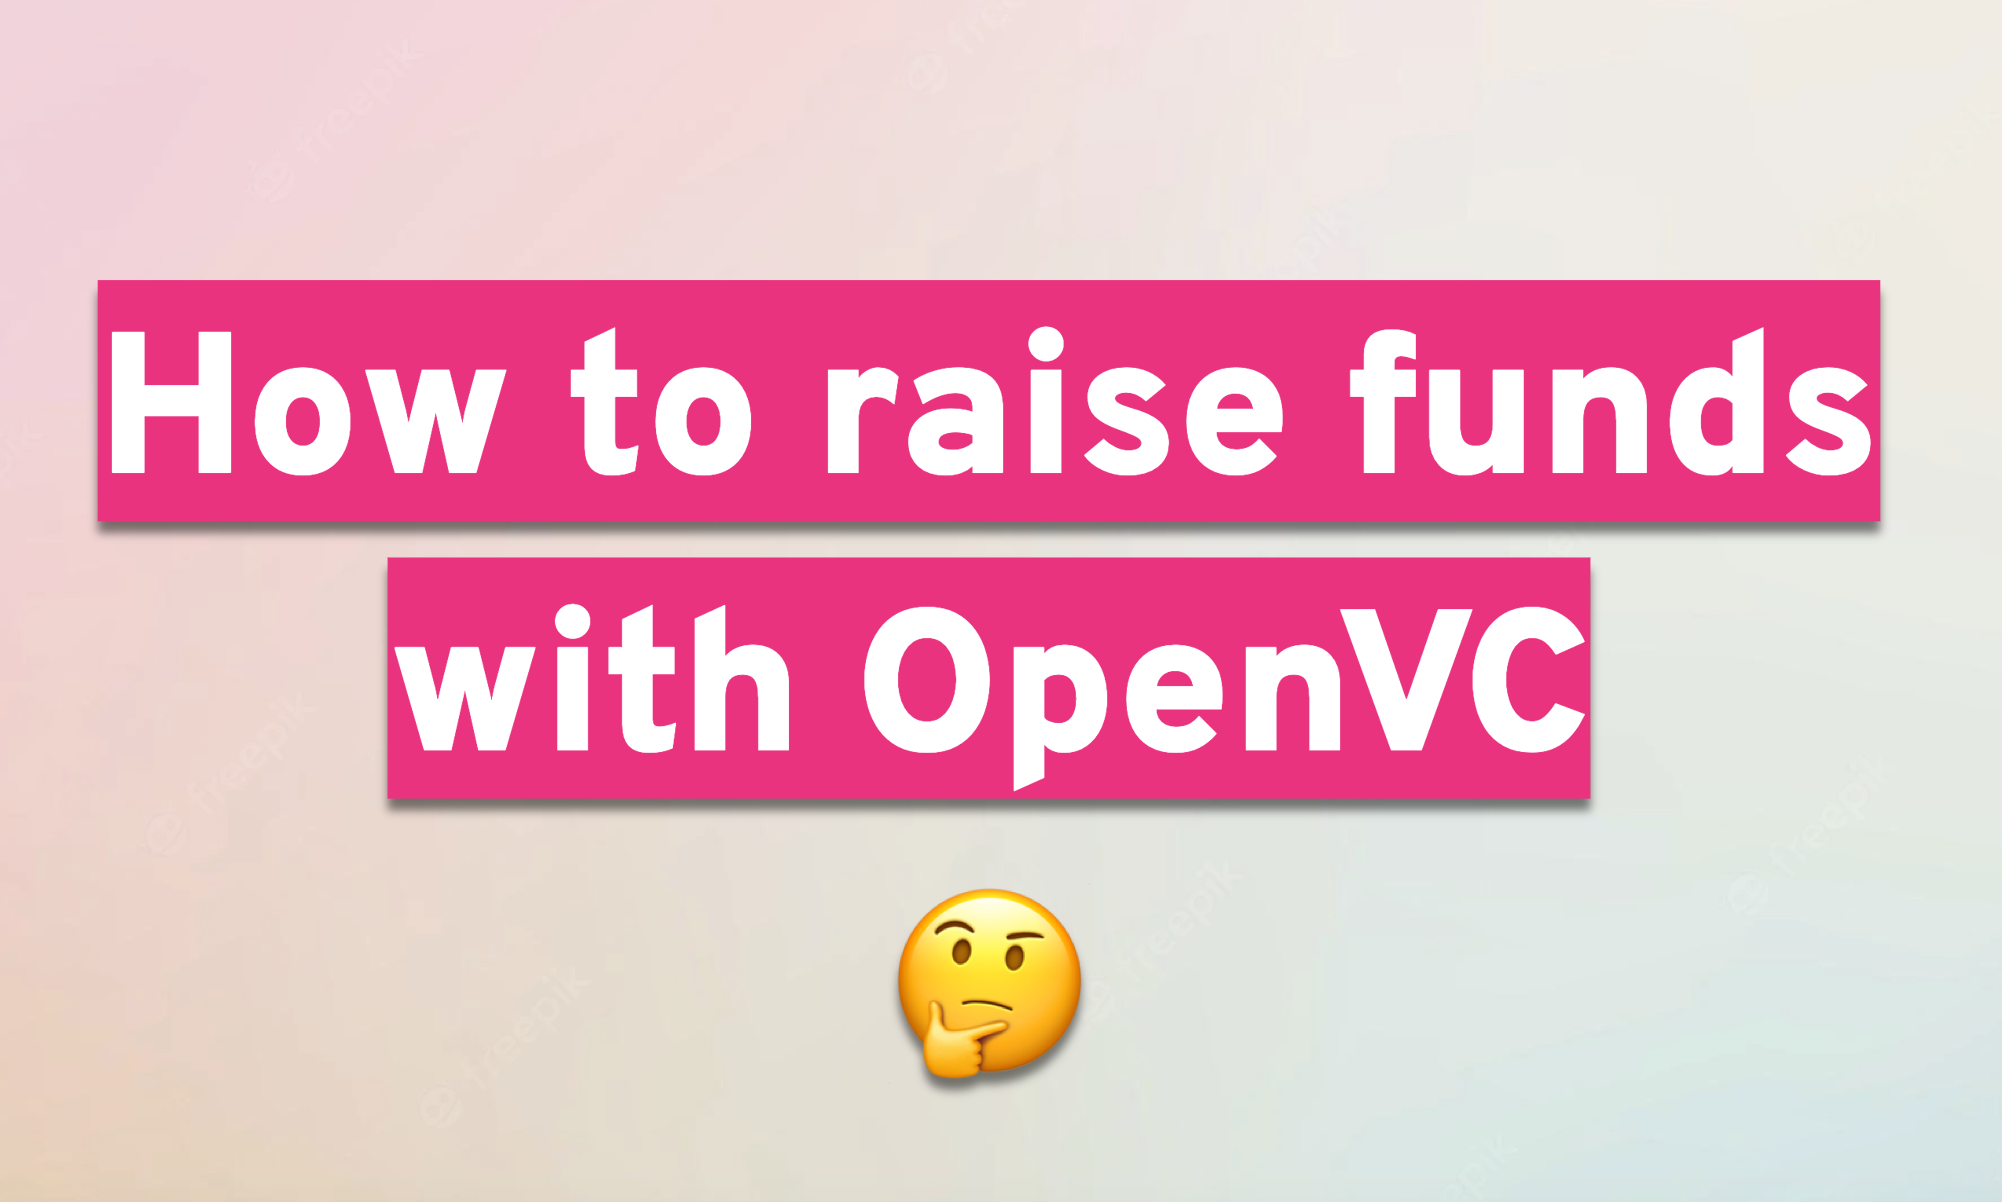 How to raise funds with OpenVC